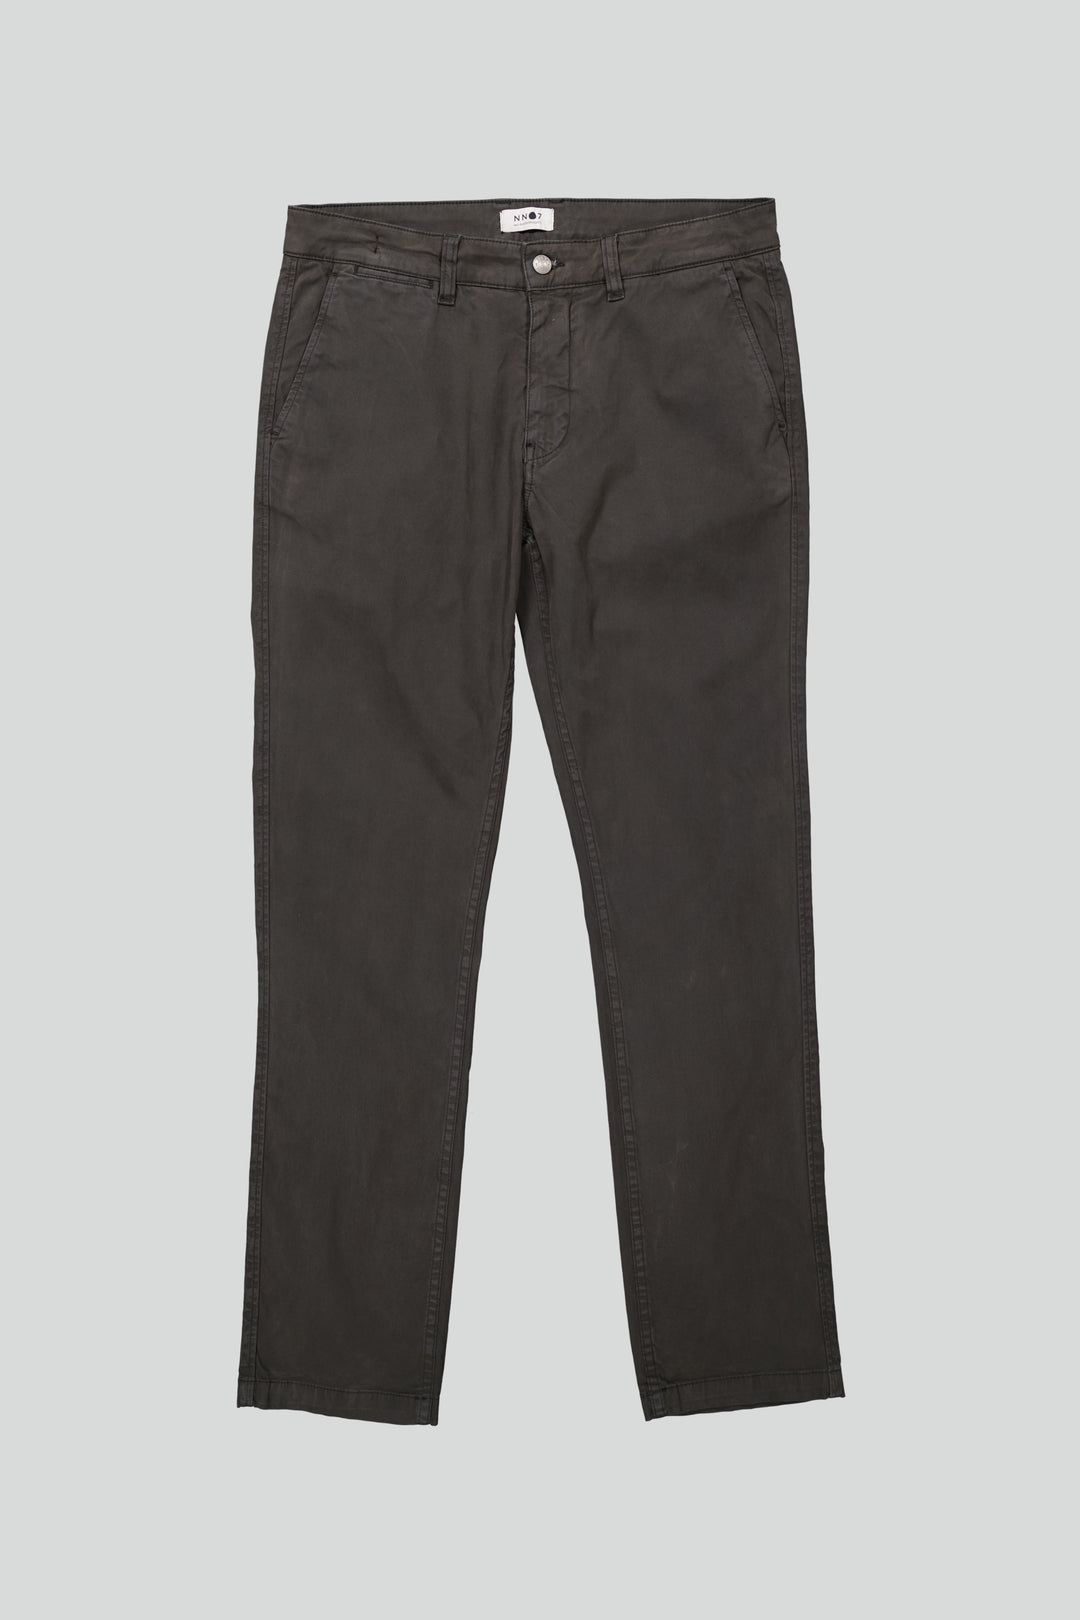 NN07 - Marco 1400 Classic Chino in Dark Army | Buster McGee